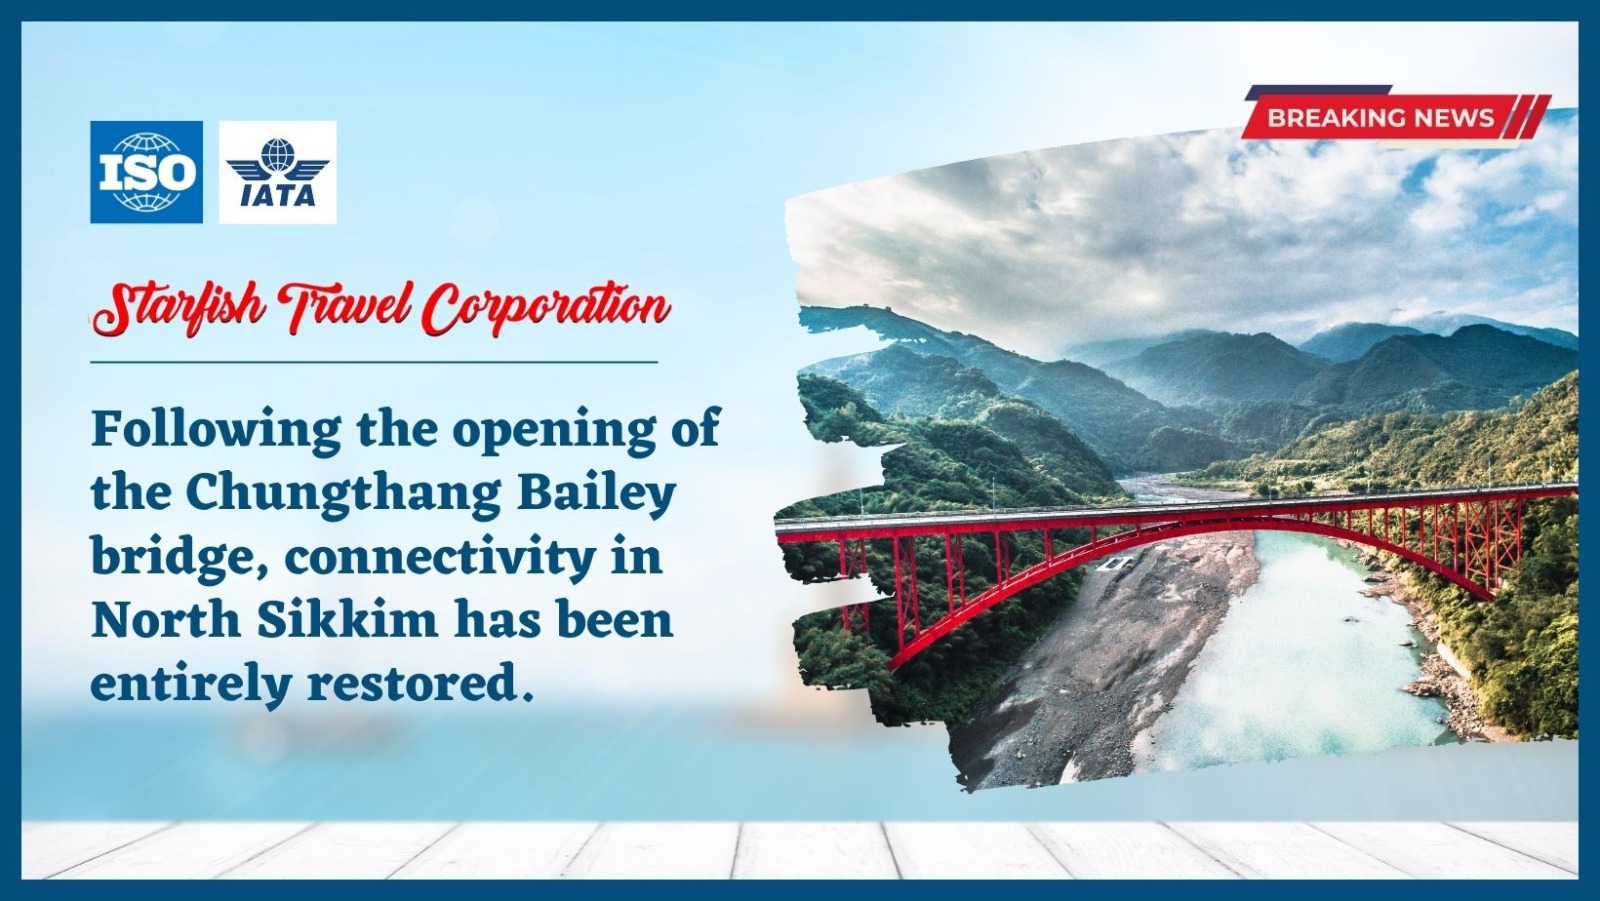 Following the opening of the Chungthang Bailey bridge, connectivity in North Sikkim has been entirely restored.